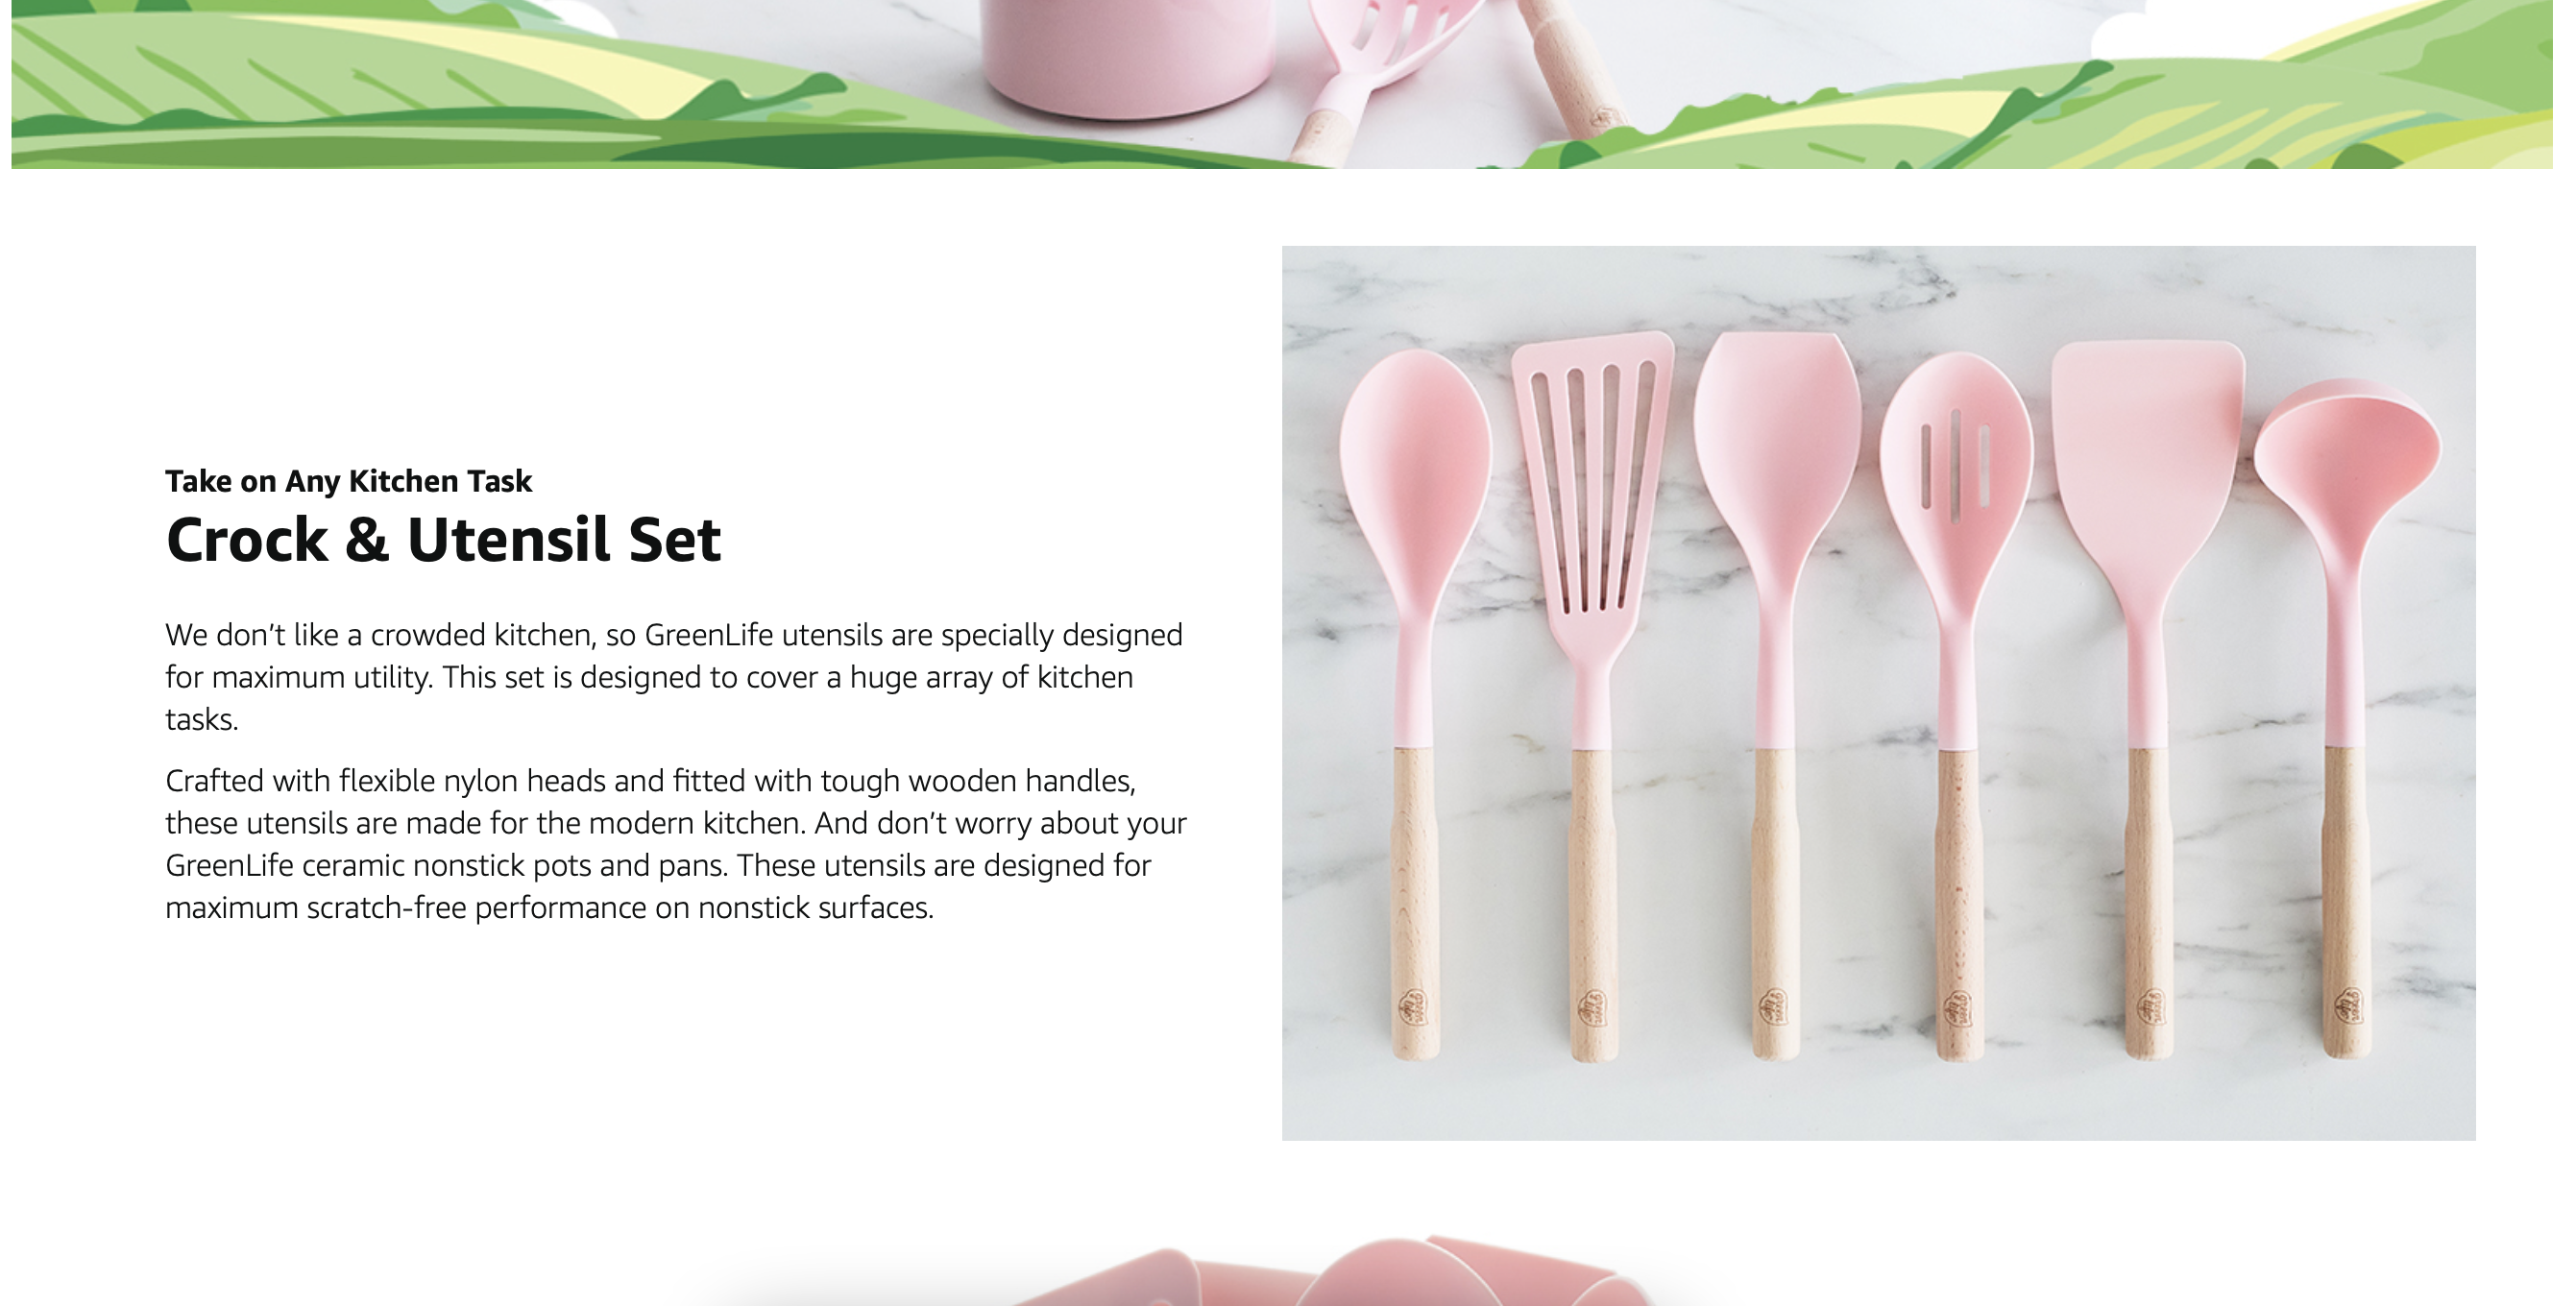 How to sell kitchen supplies on Amazon and social media?